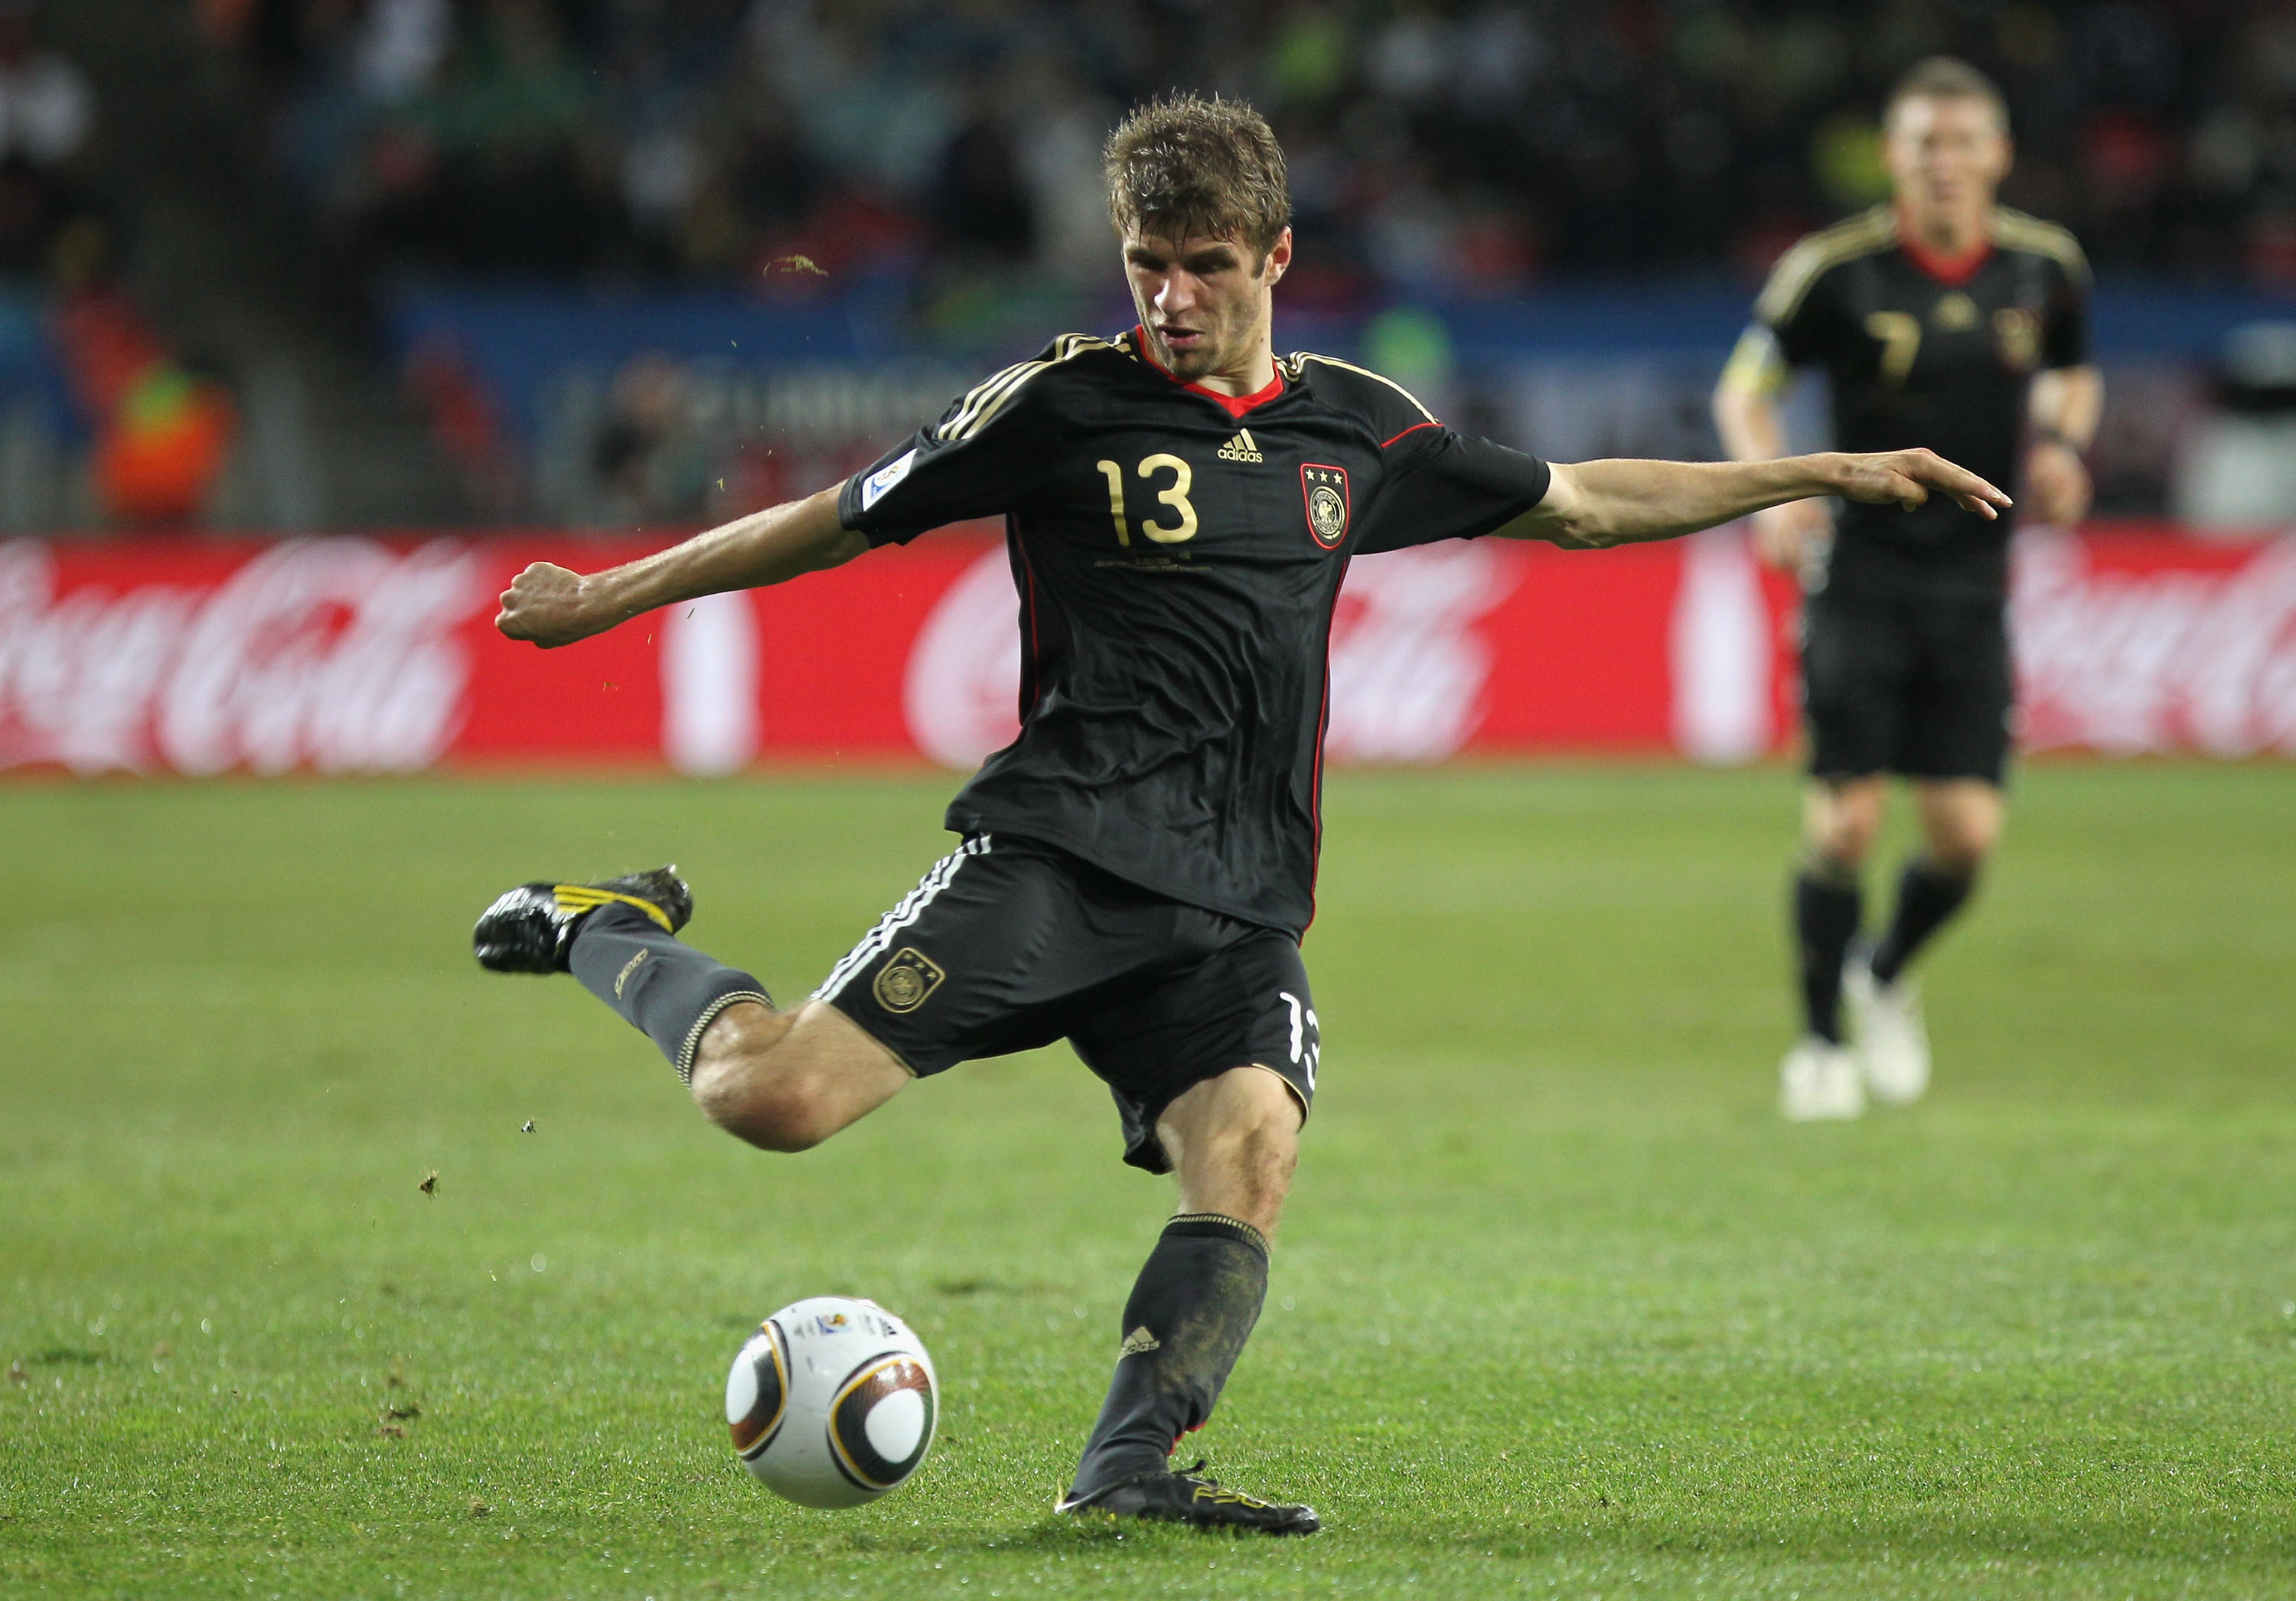 PORT ELIZABETH, SOUTH AFRICA - JULY 10:  Thomas Mueller of Germany in action during the 2010 FIFA World Cup South Africa Third Place Play-off match between Uruguay and Germany at The Nelson Mandela Bay Stadium on July 10, 2010 in Port Elizabeth, South Afr